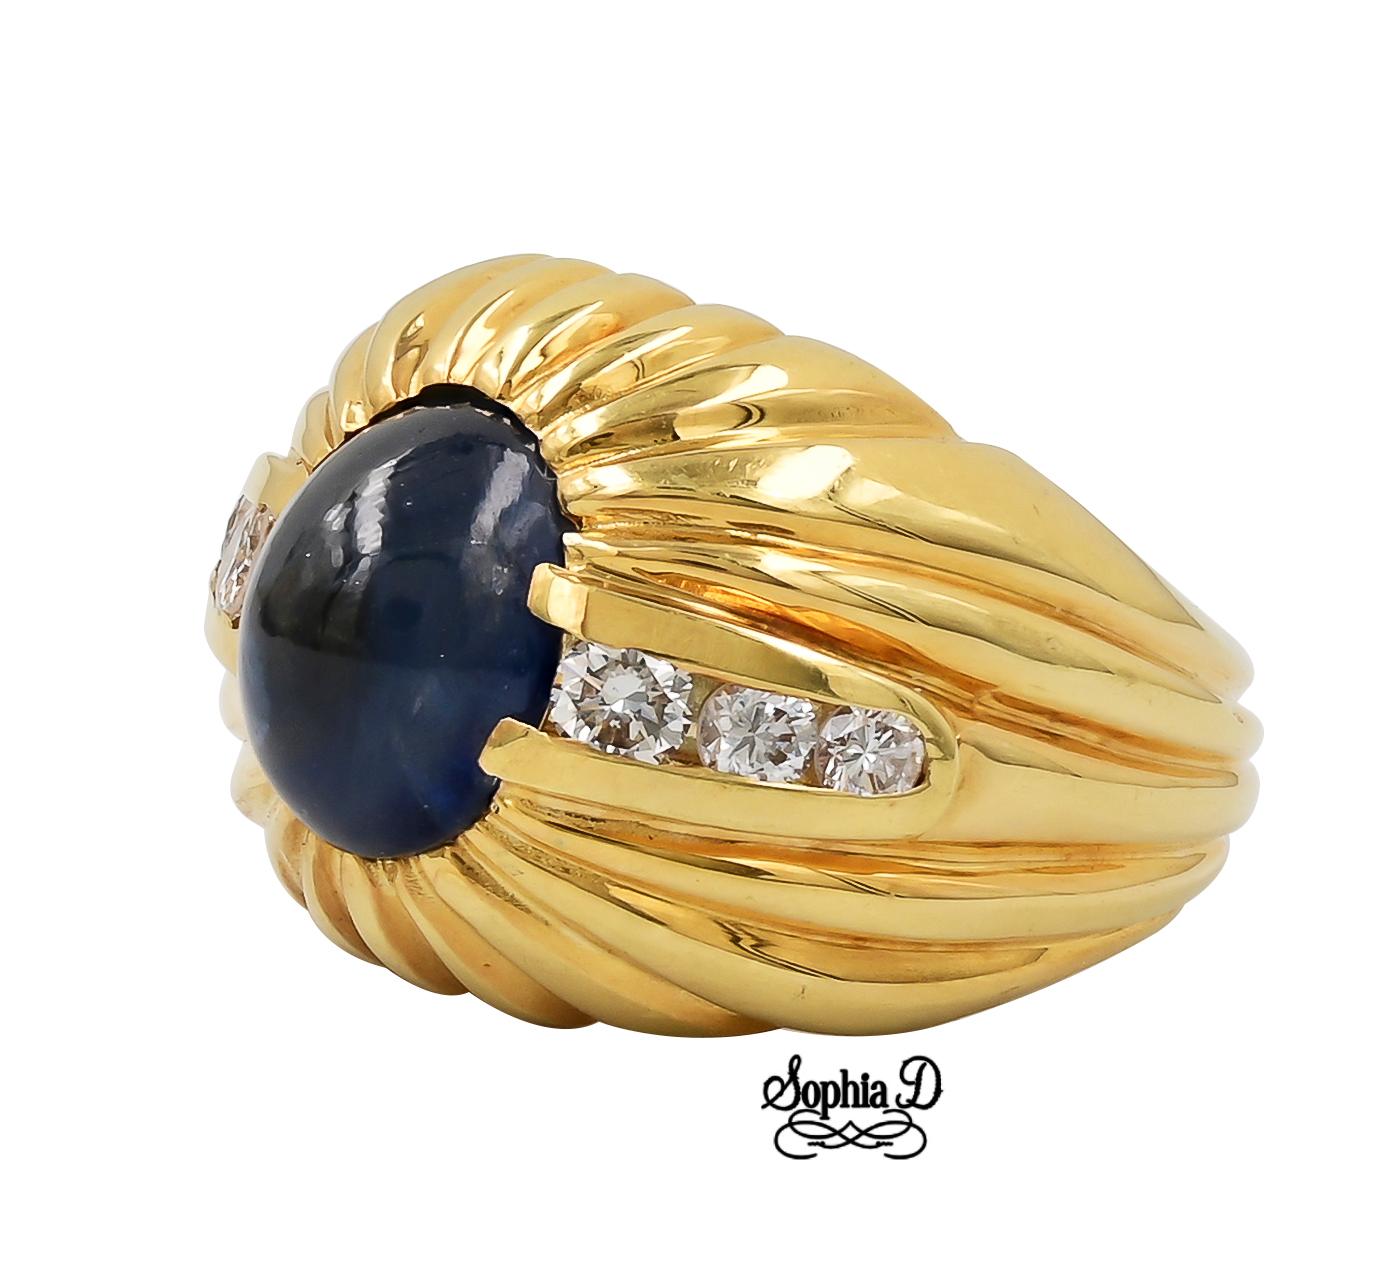 18K yellow gold ring with blue sapphire and diamond.

Sophia D by Joseph Dardashti LTD has been known worldwide for 35 years and are inspired by classic Art Deco design that merges with modern manufacturing techniques.  